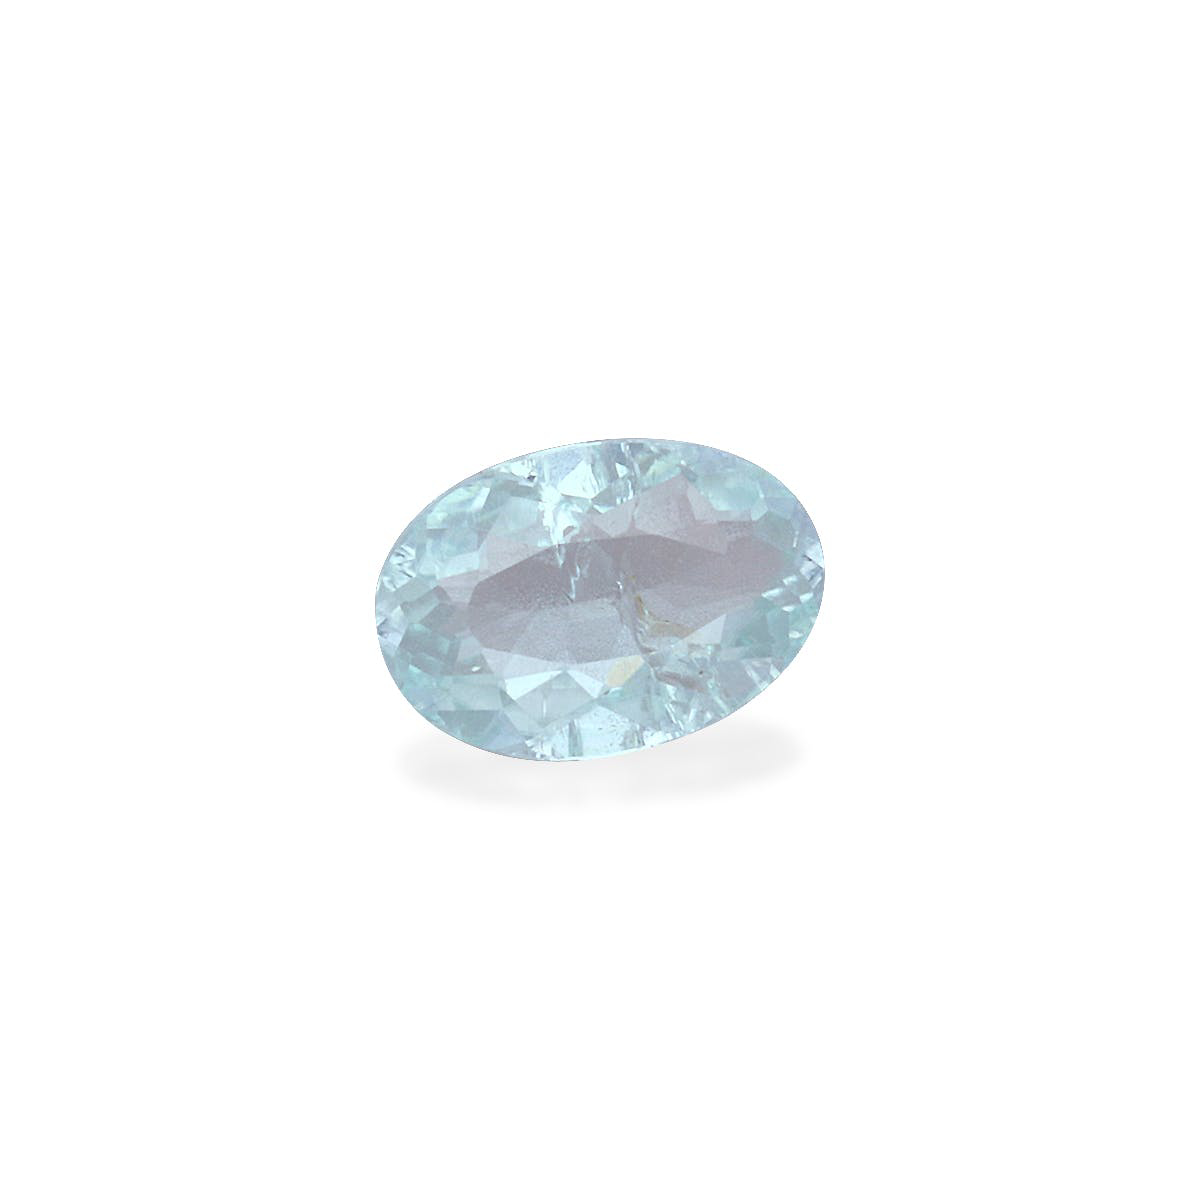 Picture of Baby Blue Paraiba Tourmaline 0.41ct - 6x4mm (PA0863)